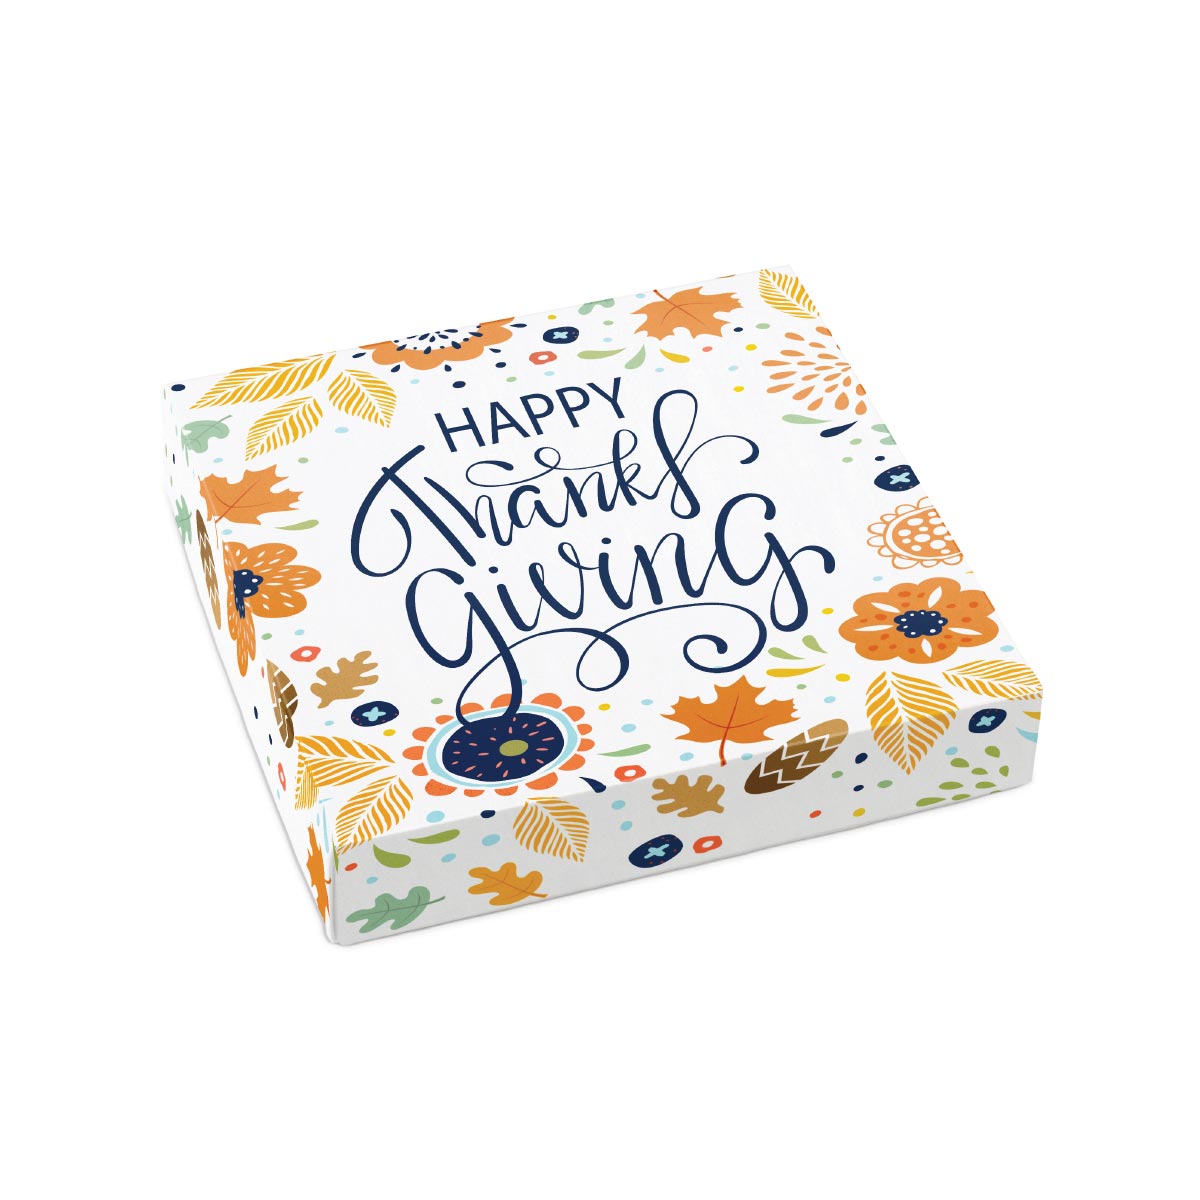 Happy Thanksgiving Themed Box Cover for 16 Piece Holiday Assortment